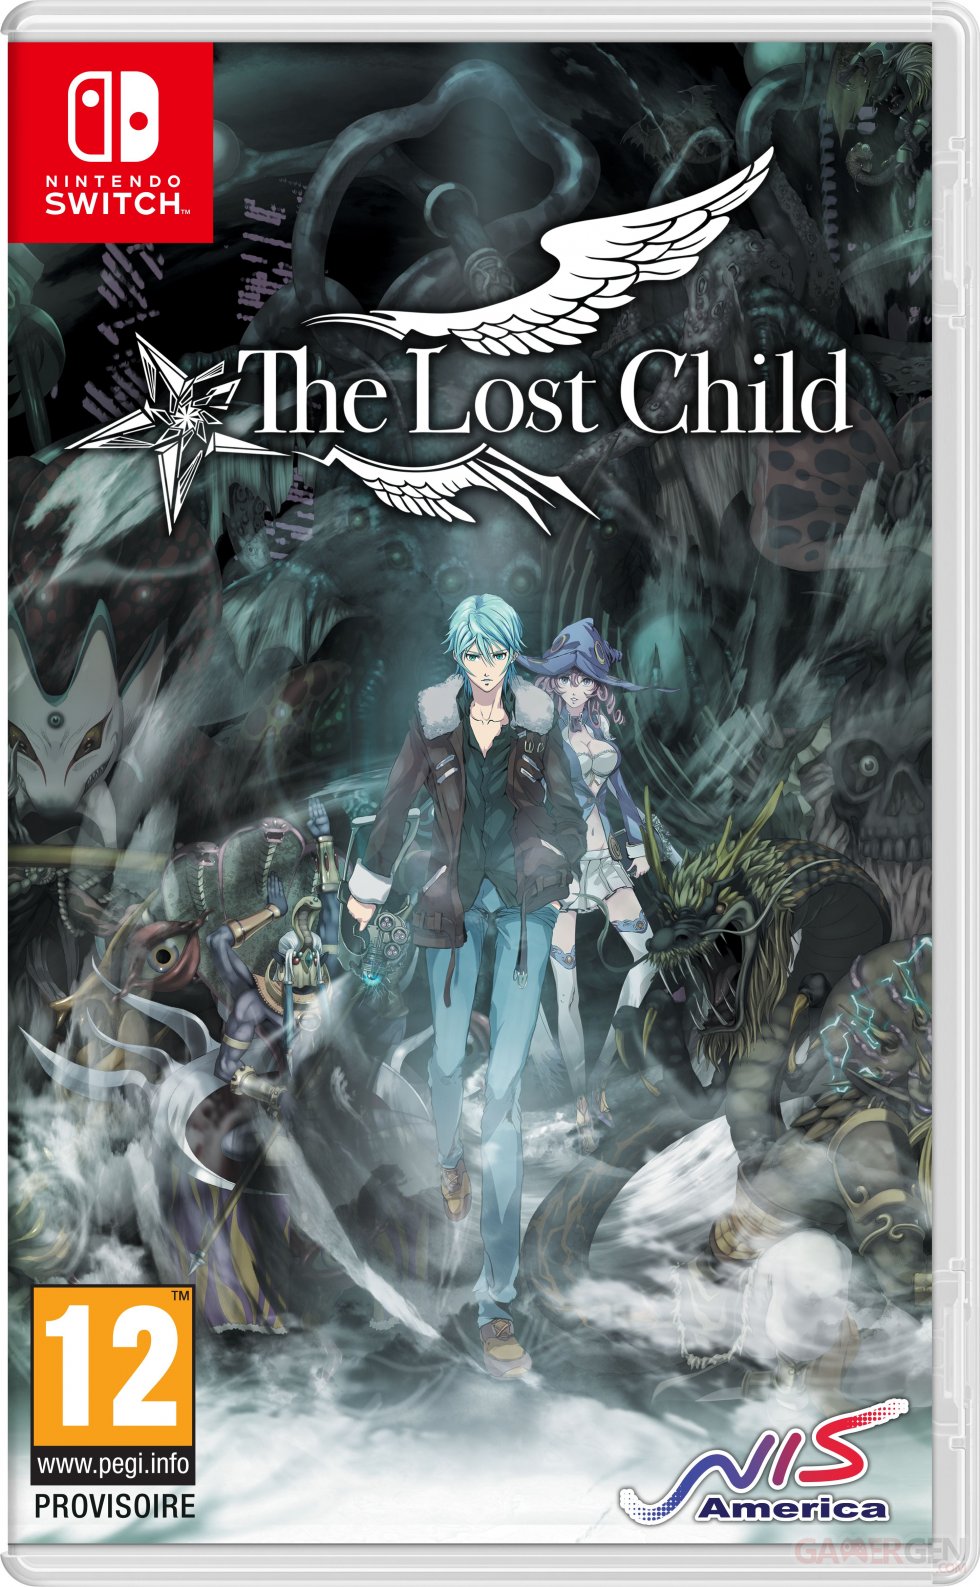 The Lost Child 03-04-18 (12)